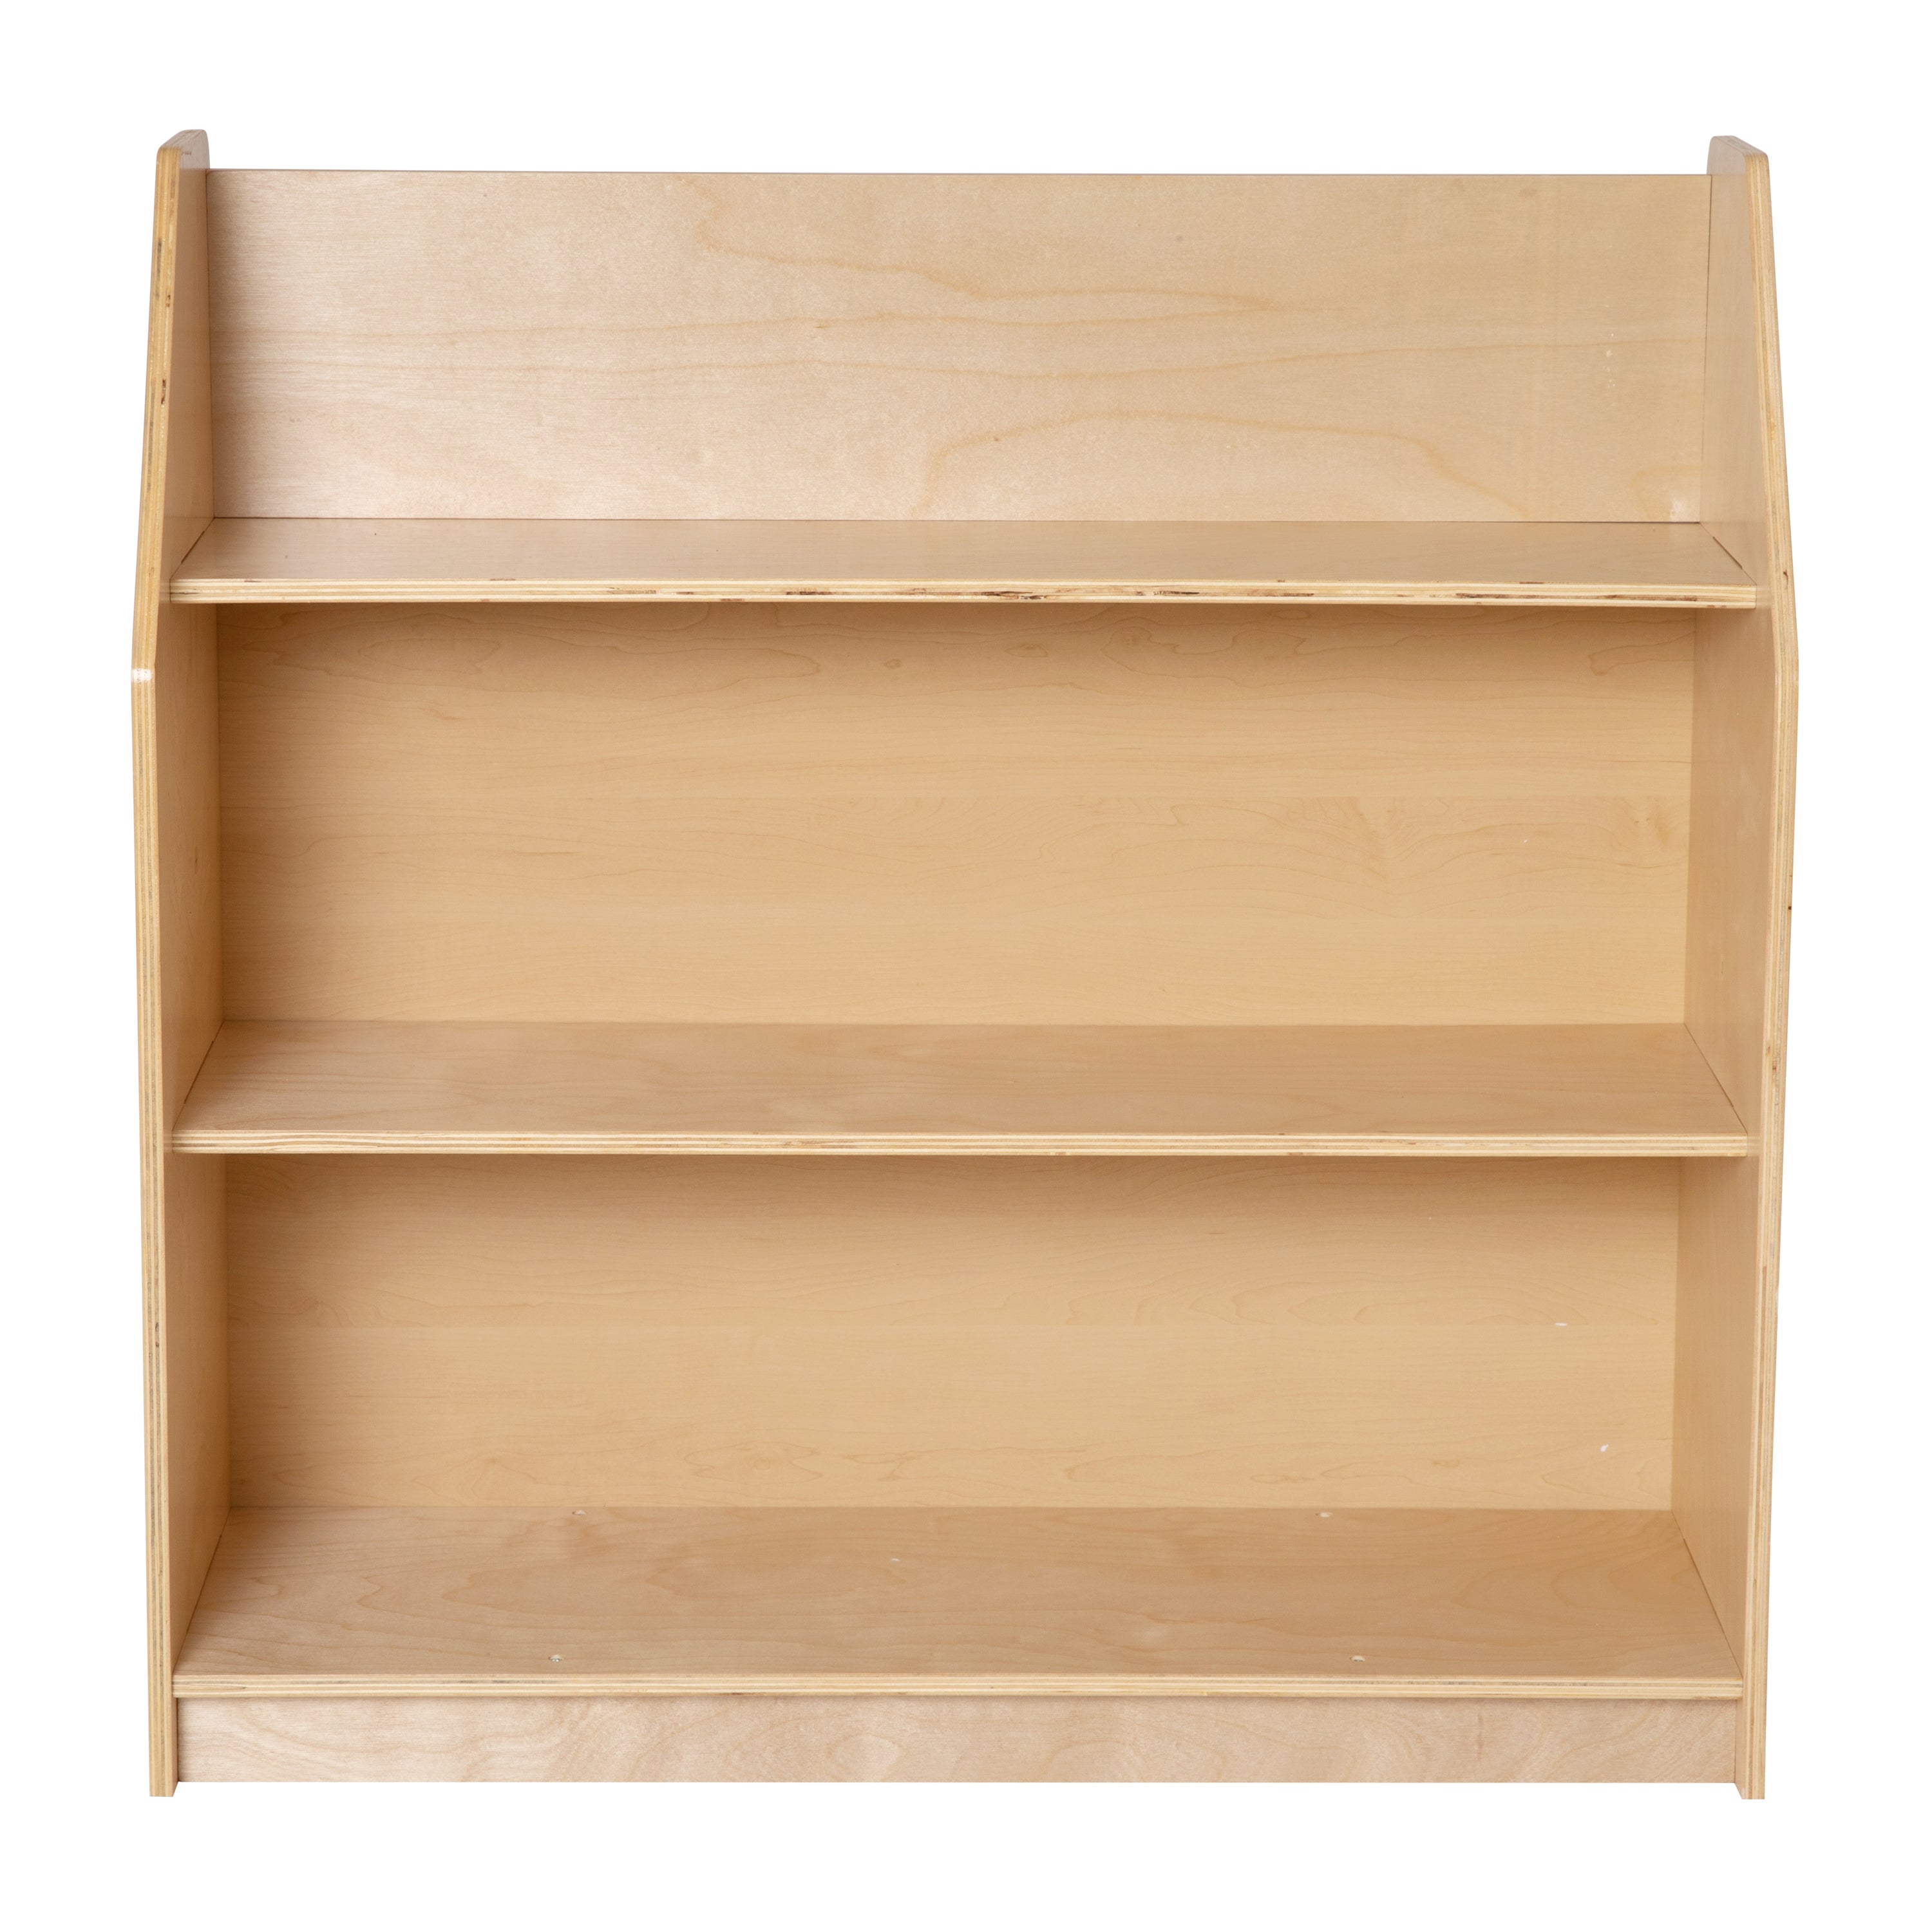 Wooden 3 Shelf Book Display with Safe, Kid Friendly Curved Edges - Commercial Grade for Daycare, Classroom or Playroom Storage-en Classroom Storage-Flash Furniture-Wall2Wall Furnishings